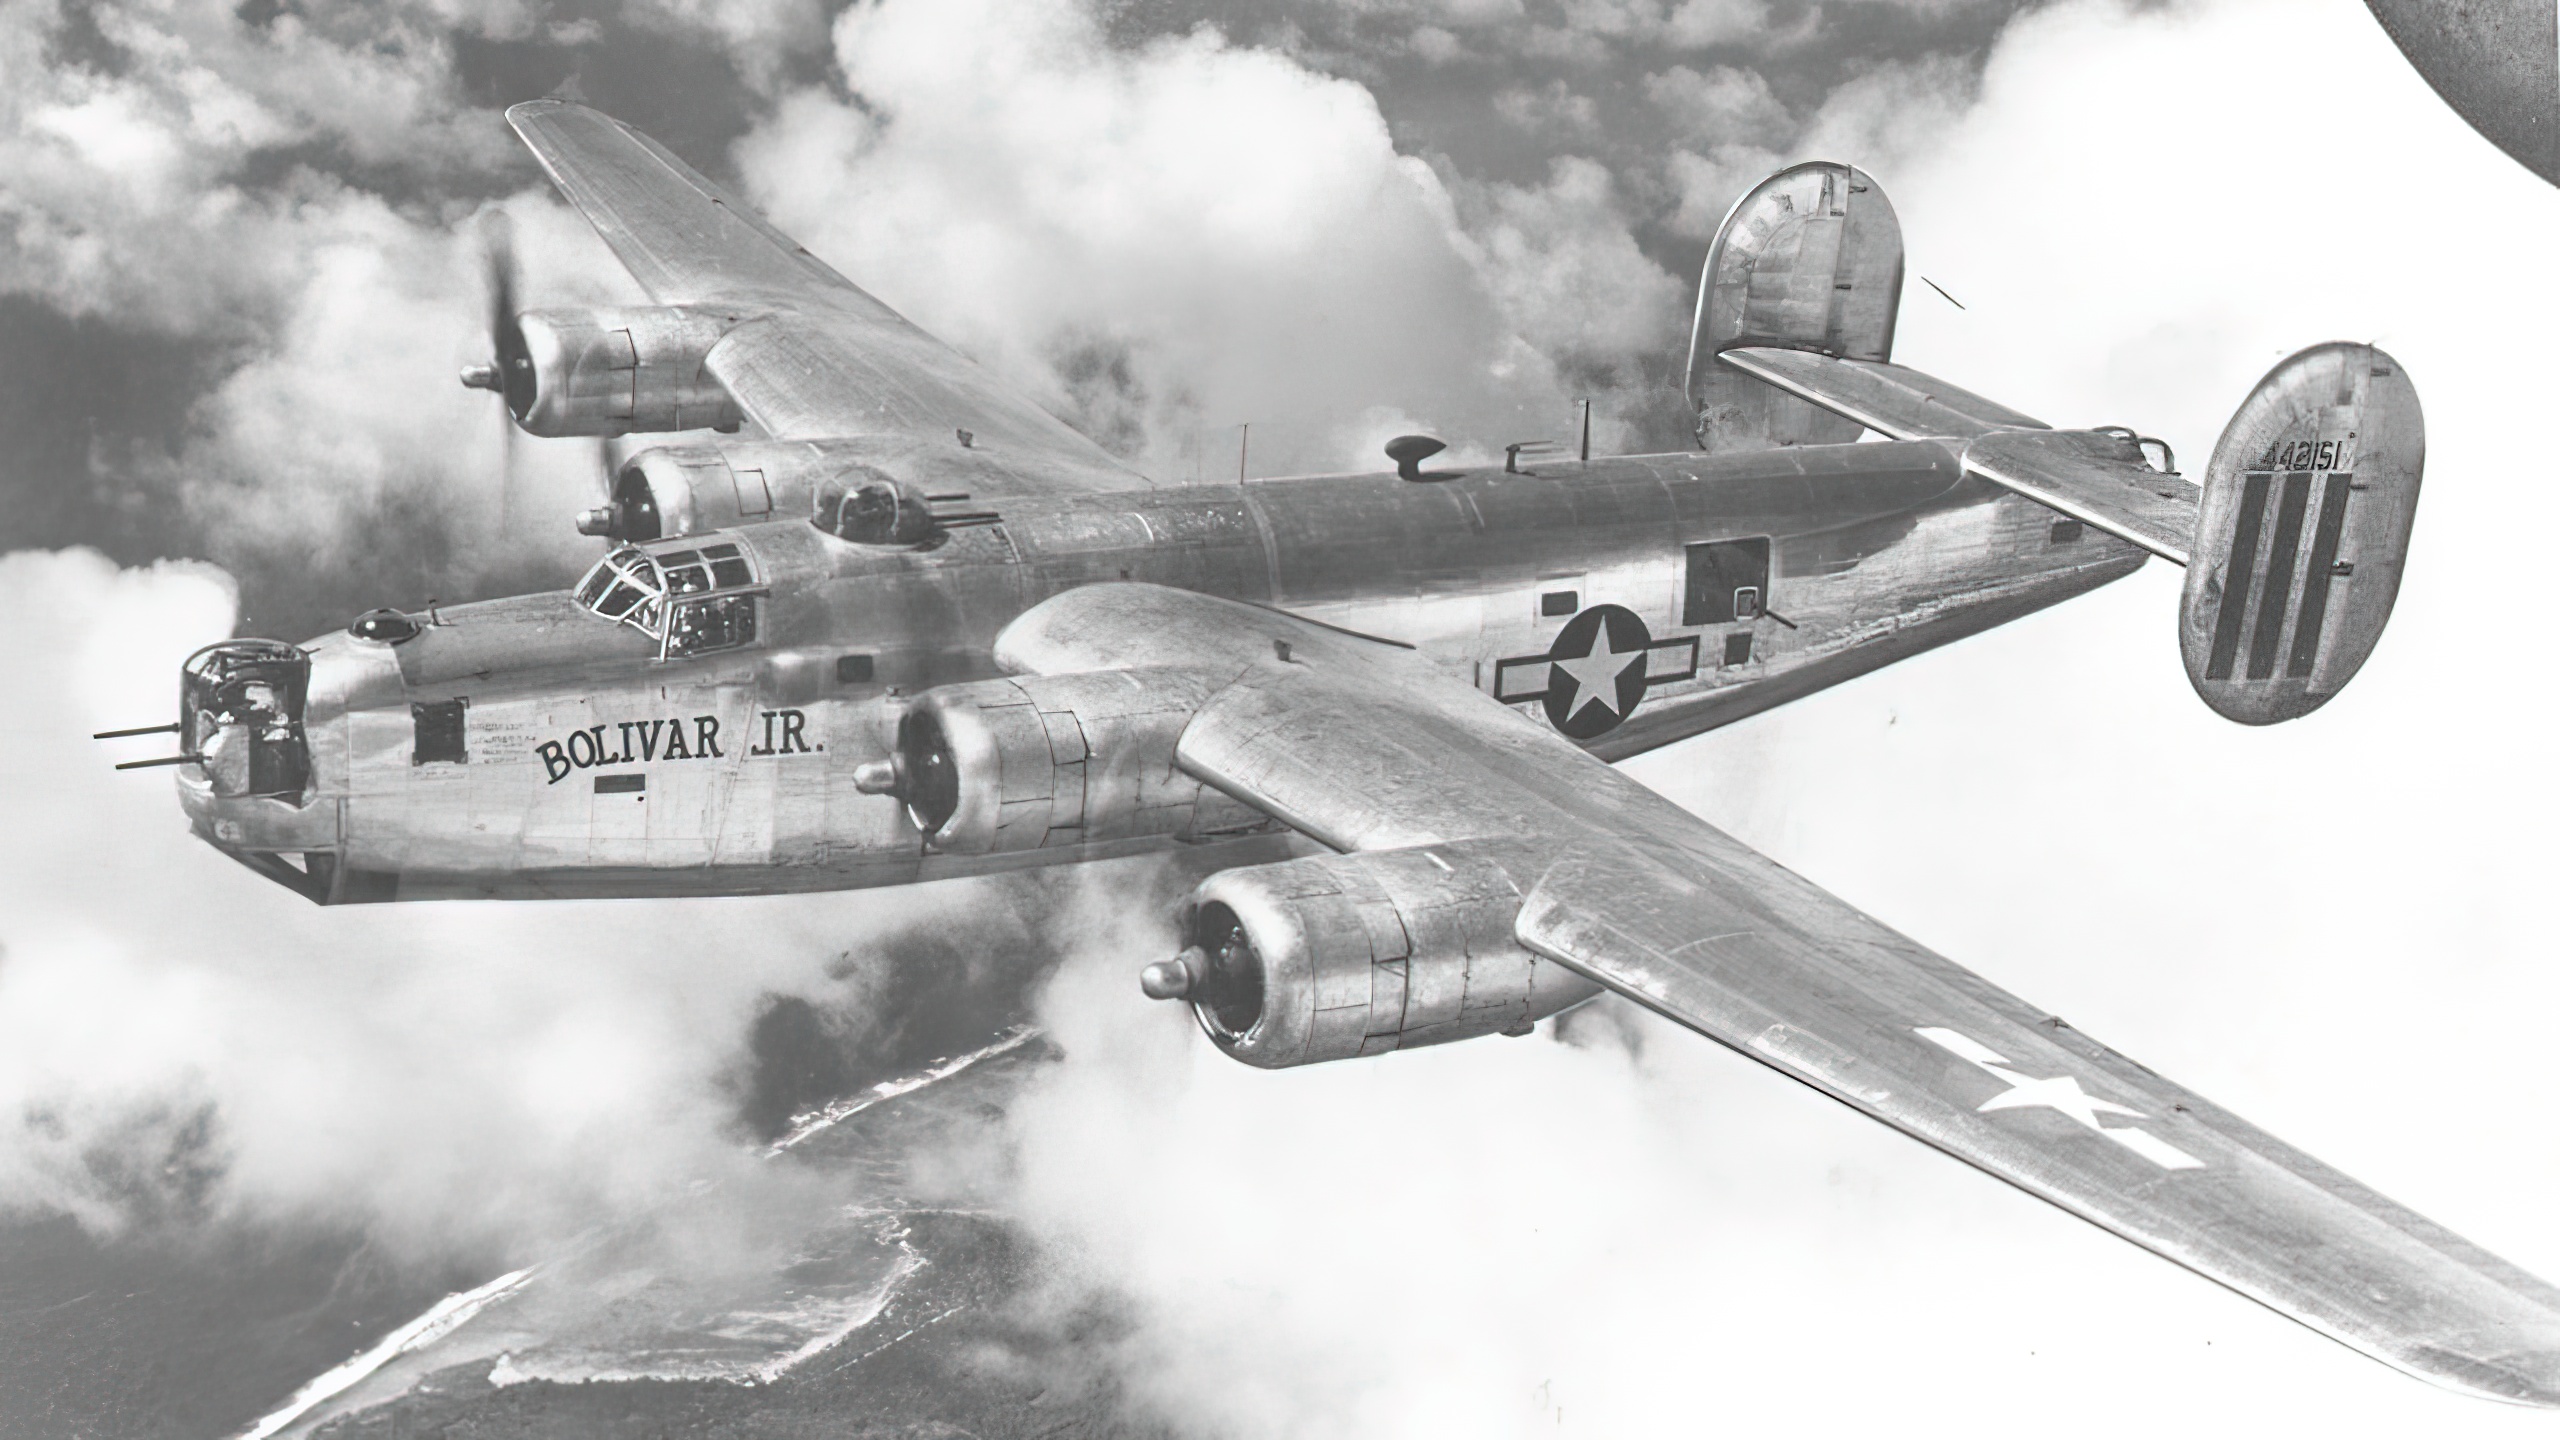 A U.S. Army Air Force Consolidated B-24M-20-CO Liberator (s/n 44-42151) in flight